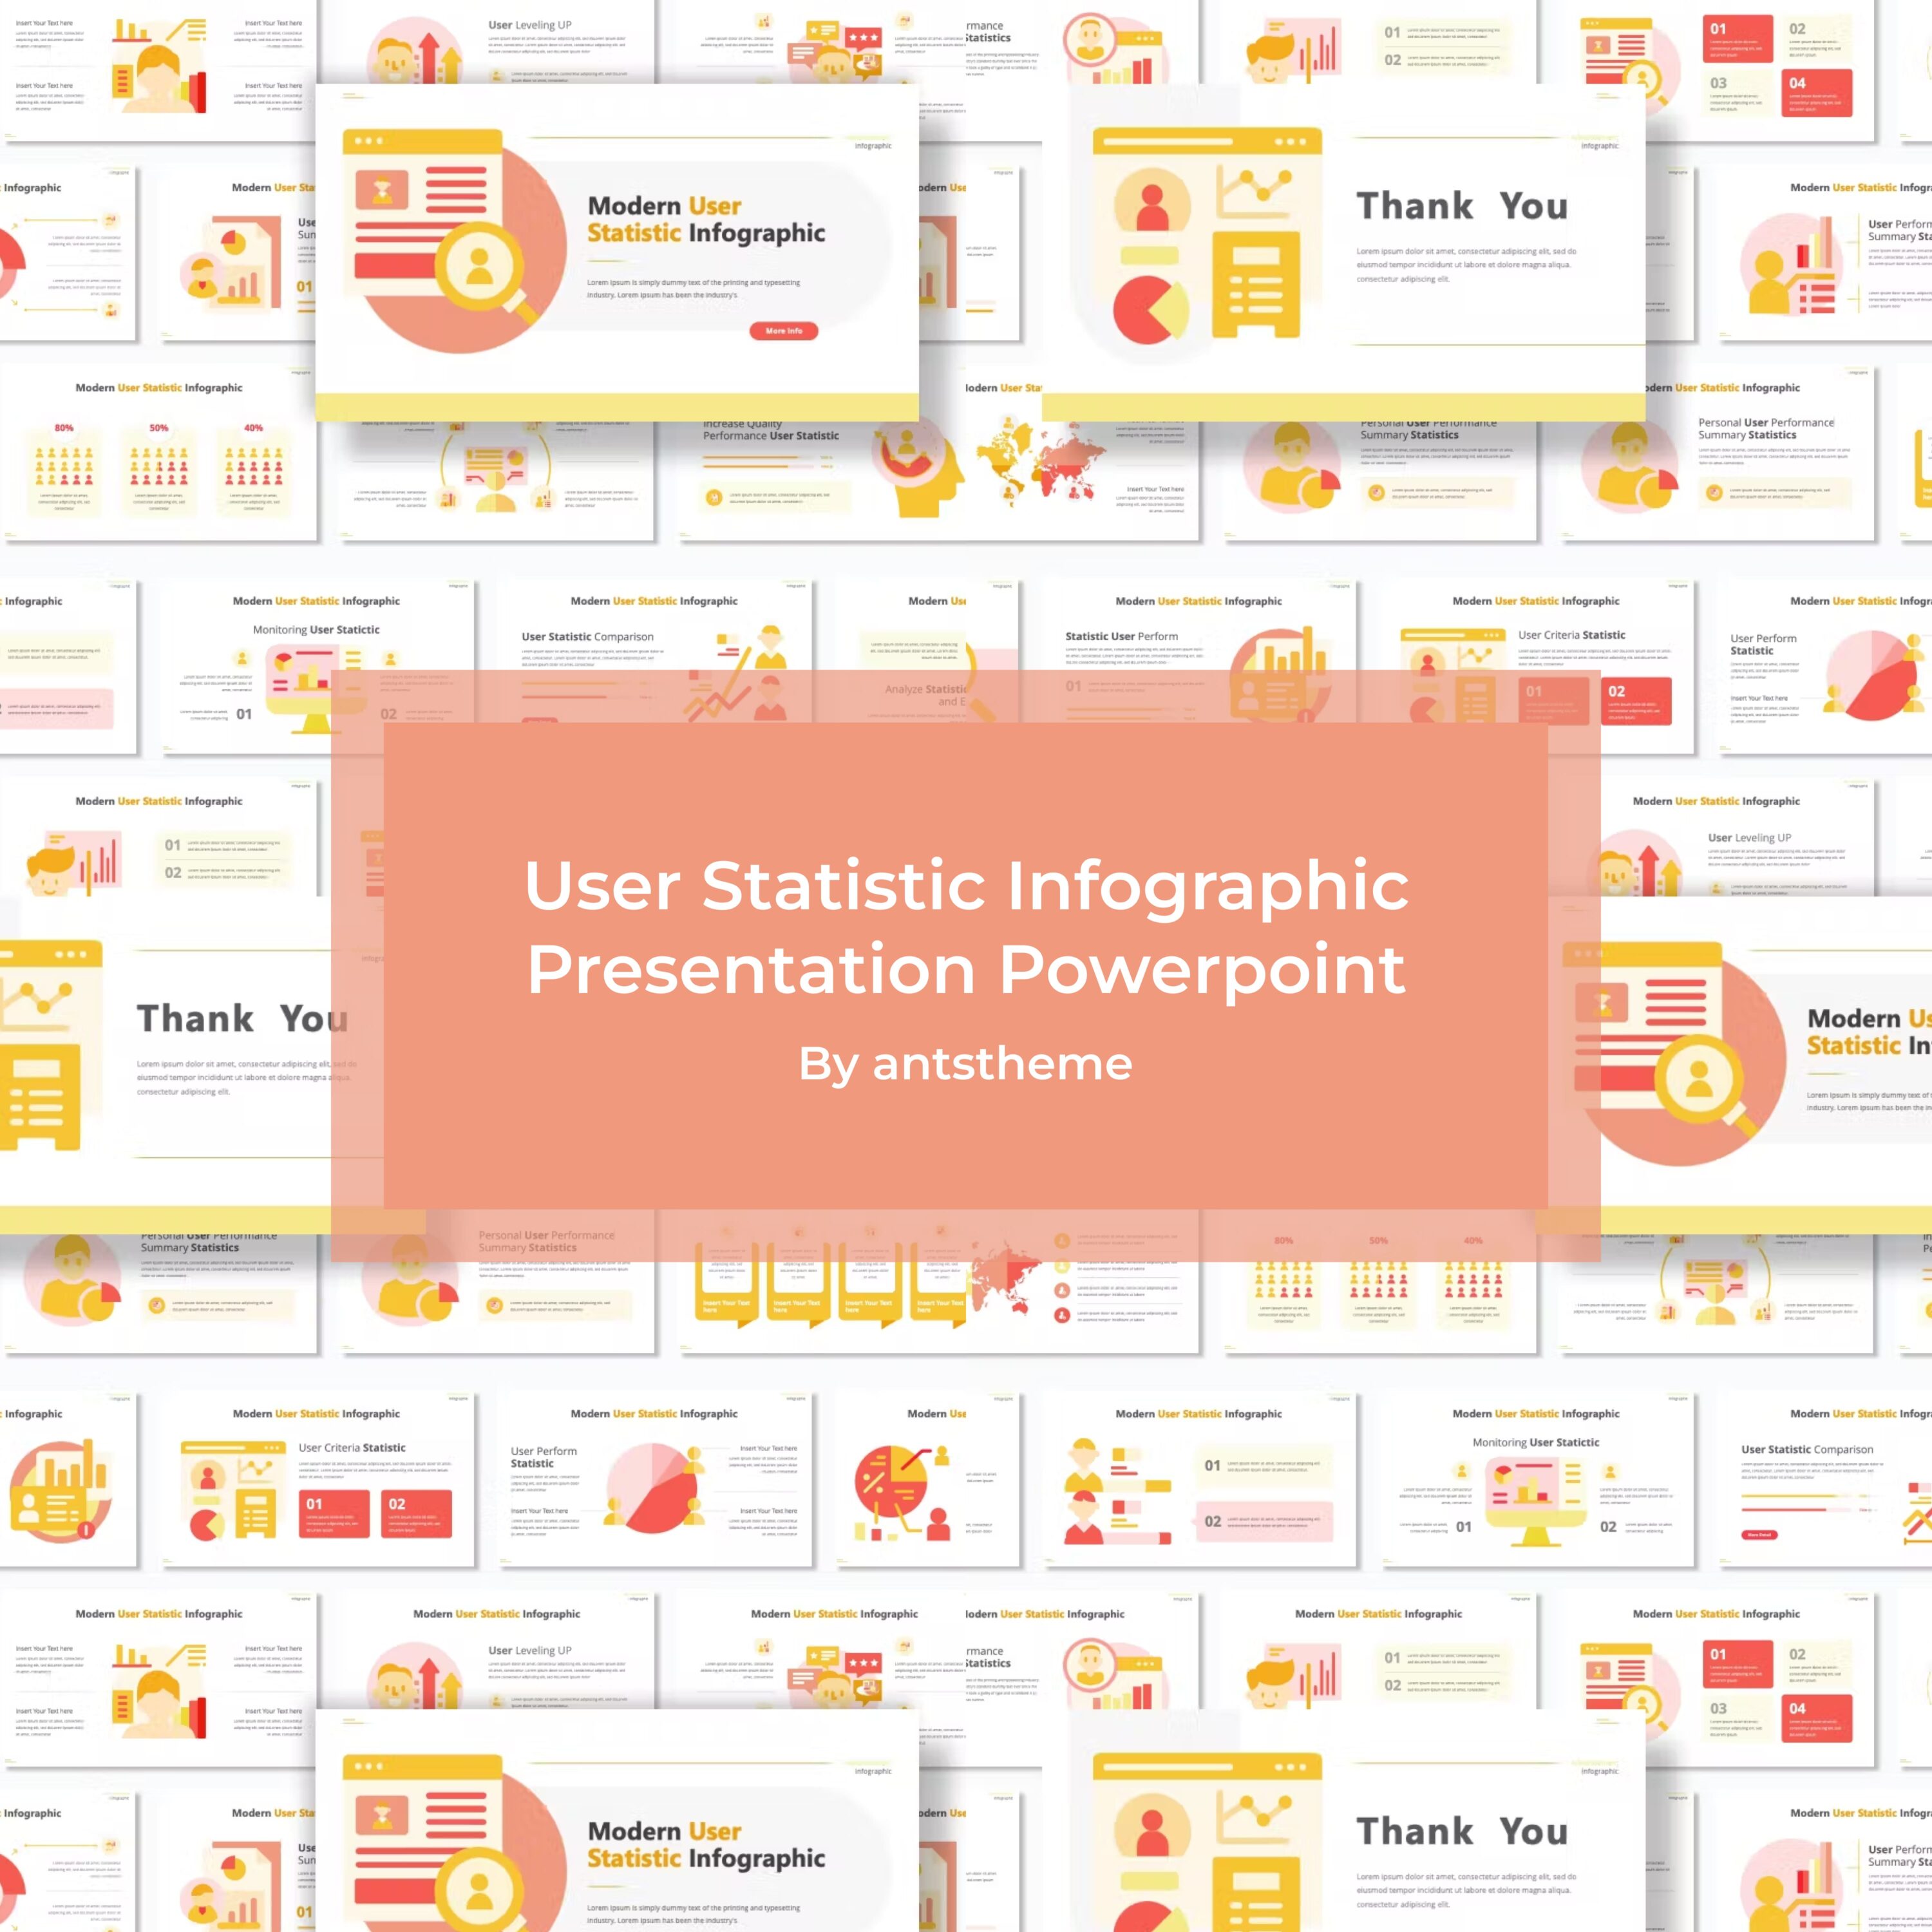 User Statistic Infographic Presentation Powerpoint - main image preview.